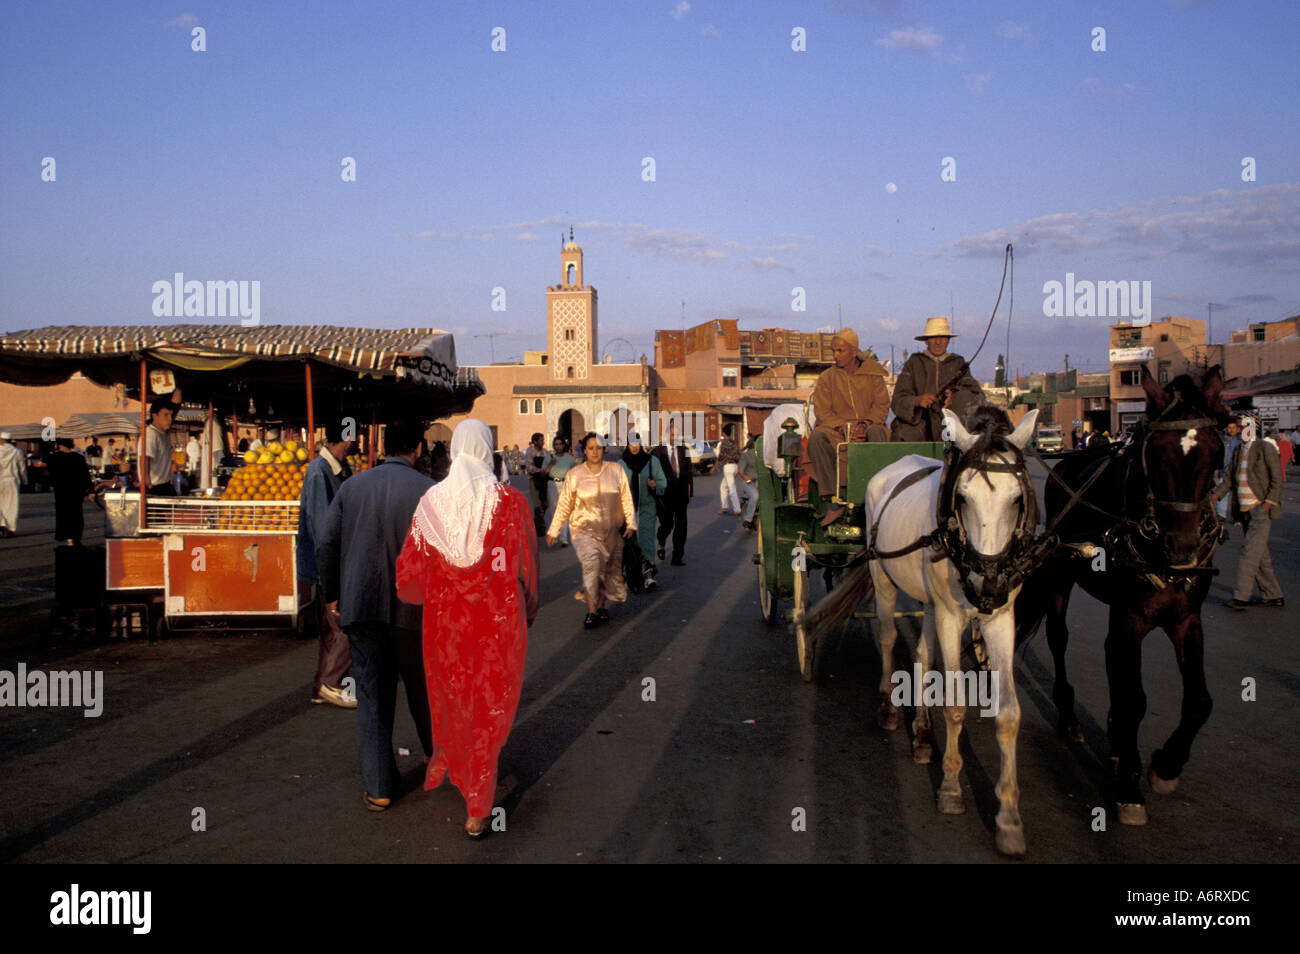 Africa, Morocco, Marrakesh, Muslims in traditional dress near orange juice stalls and mosque in Djemaa el-Fna Stock Photo